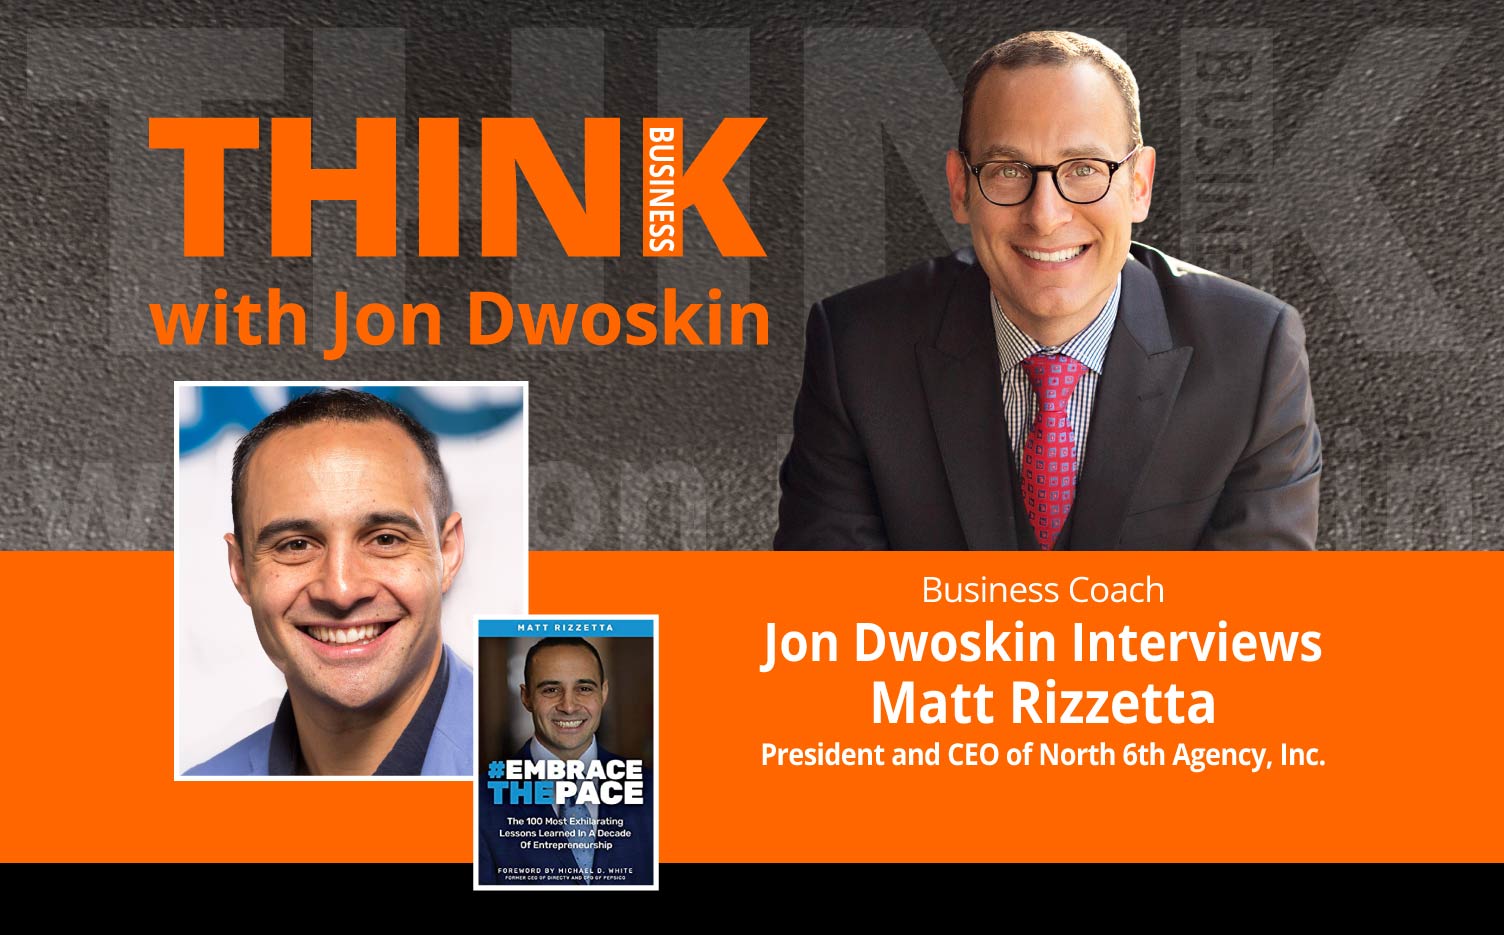 THINK Business Podcast: Jon Dwoskin Interviews Matt Rizzetta, President and CEO of North 6th Agency, Inc. 